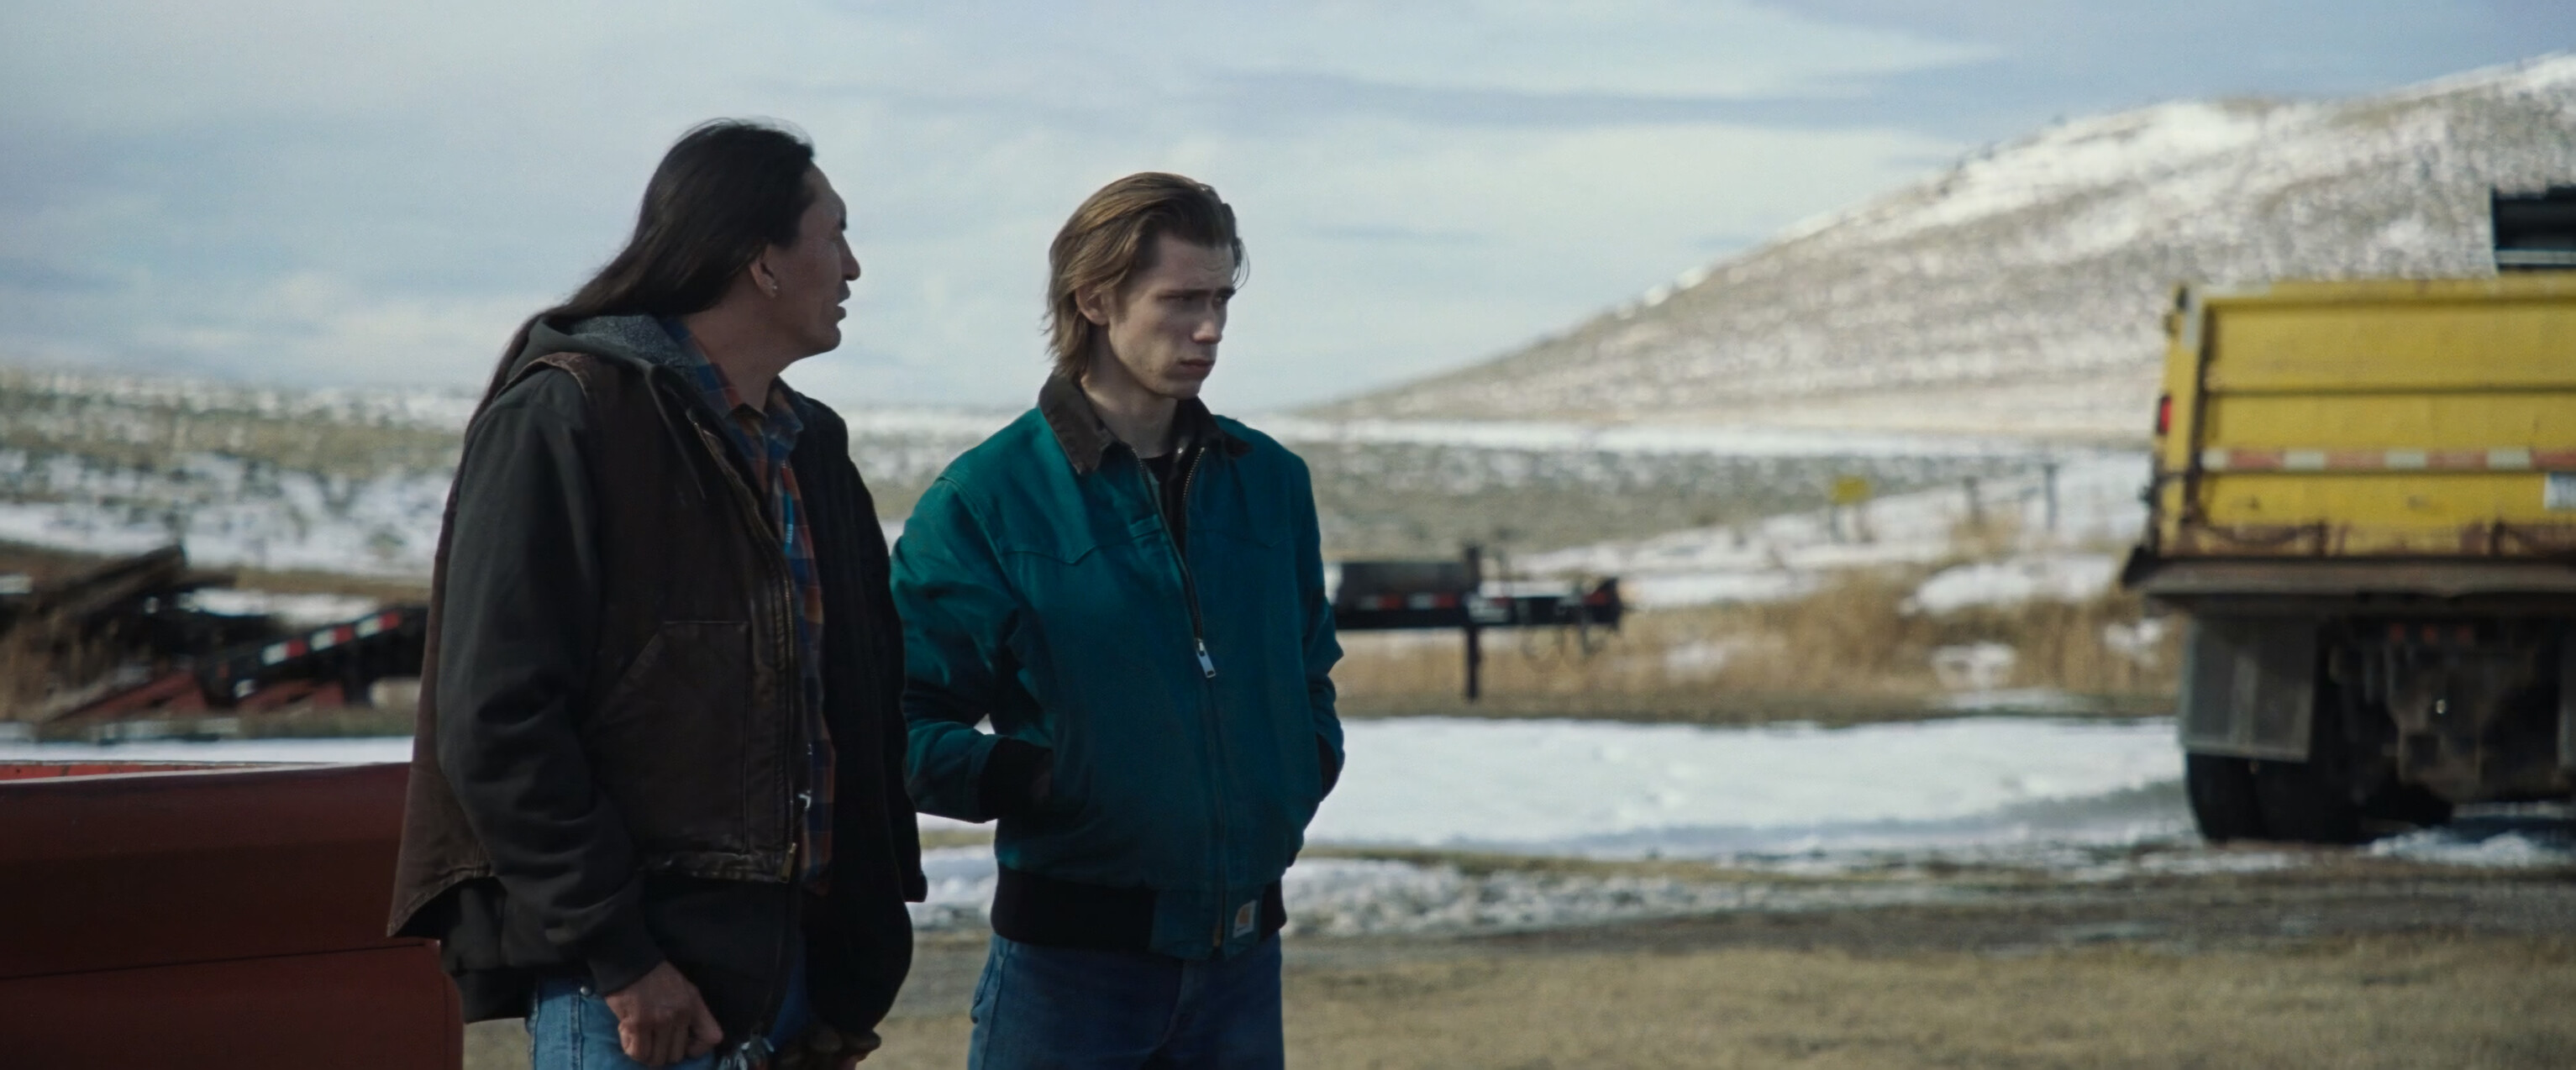 On the Count of Three, Montana Story, Intense drama, Powerful performances, Compelling narrative, 3070x1280 Dual Screen Desktop